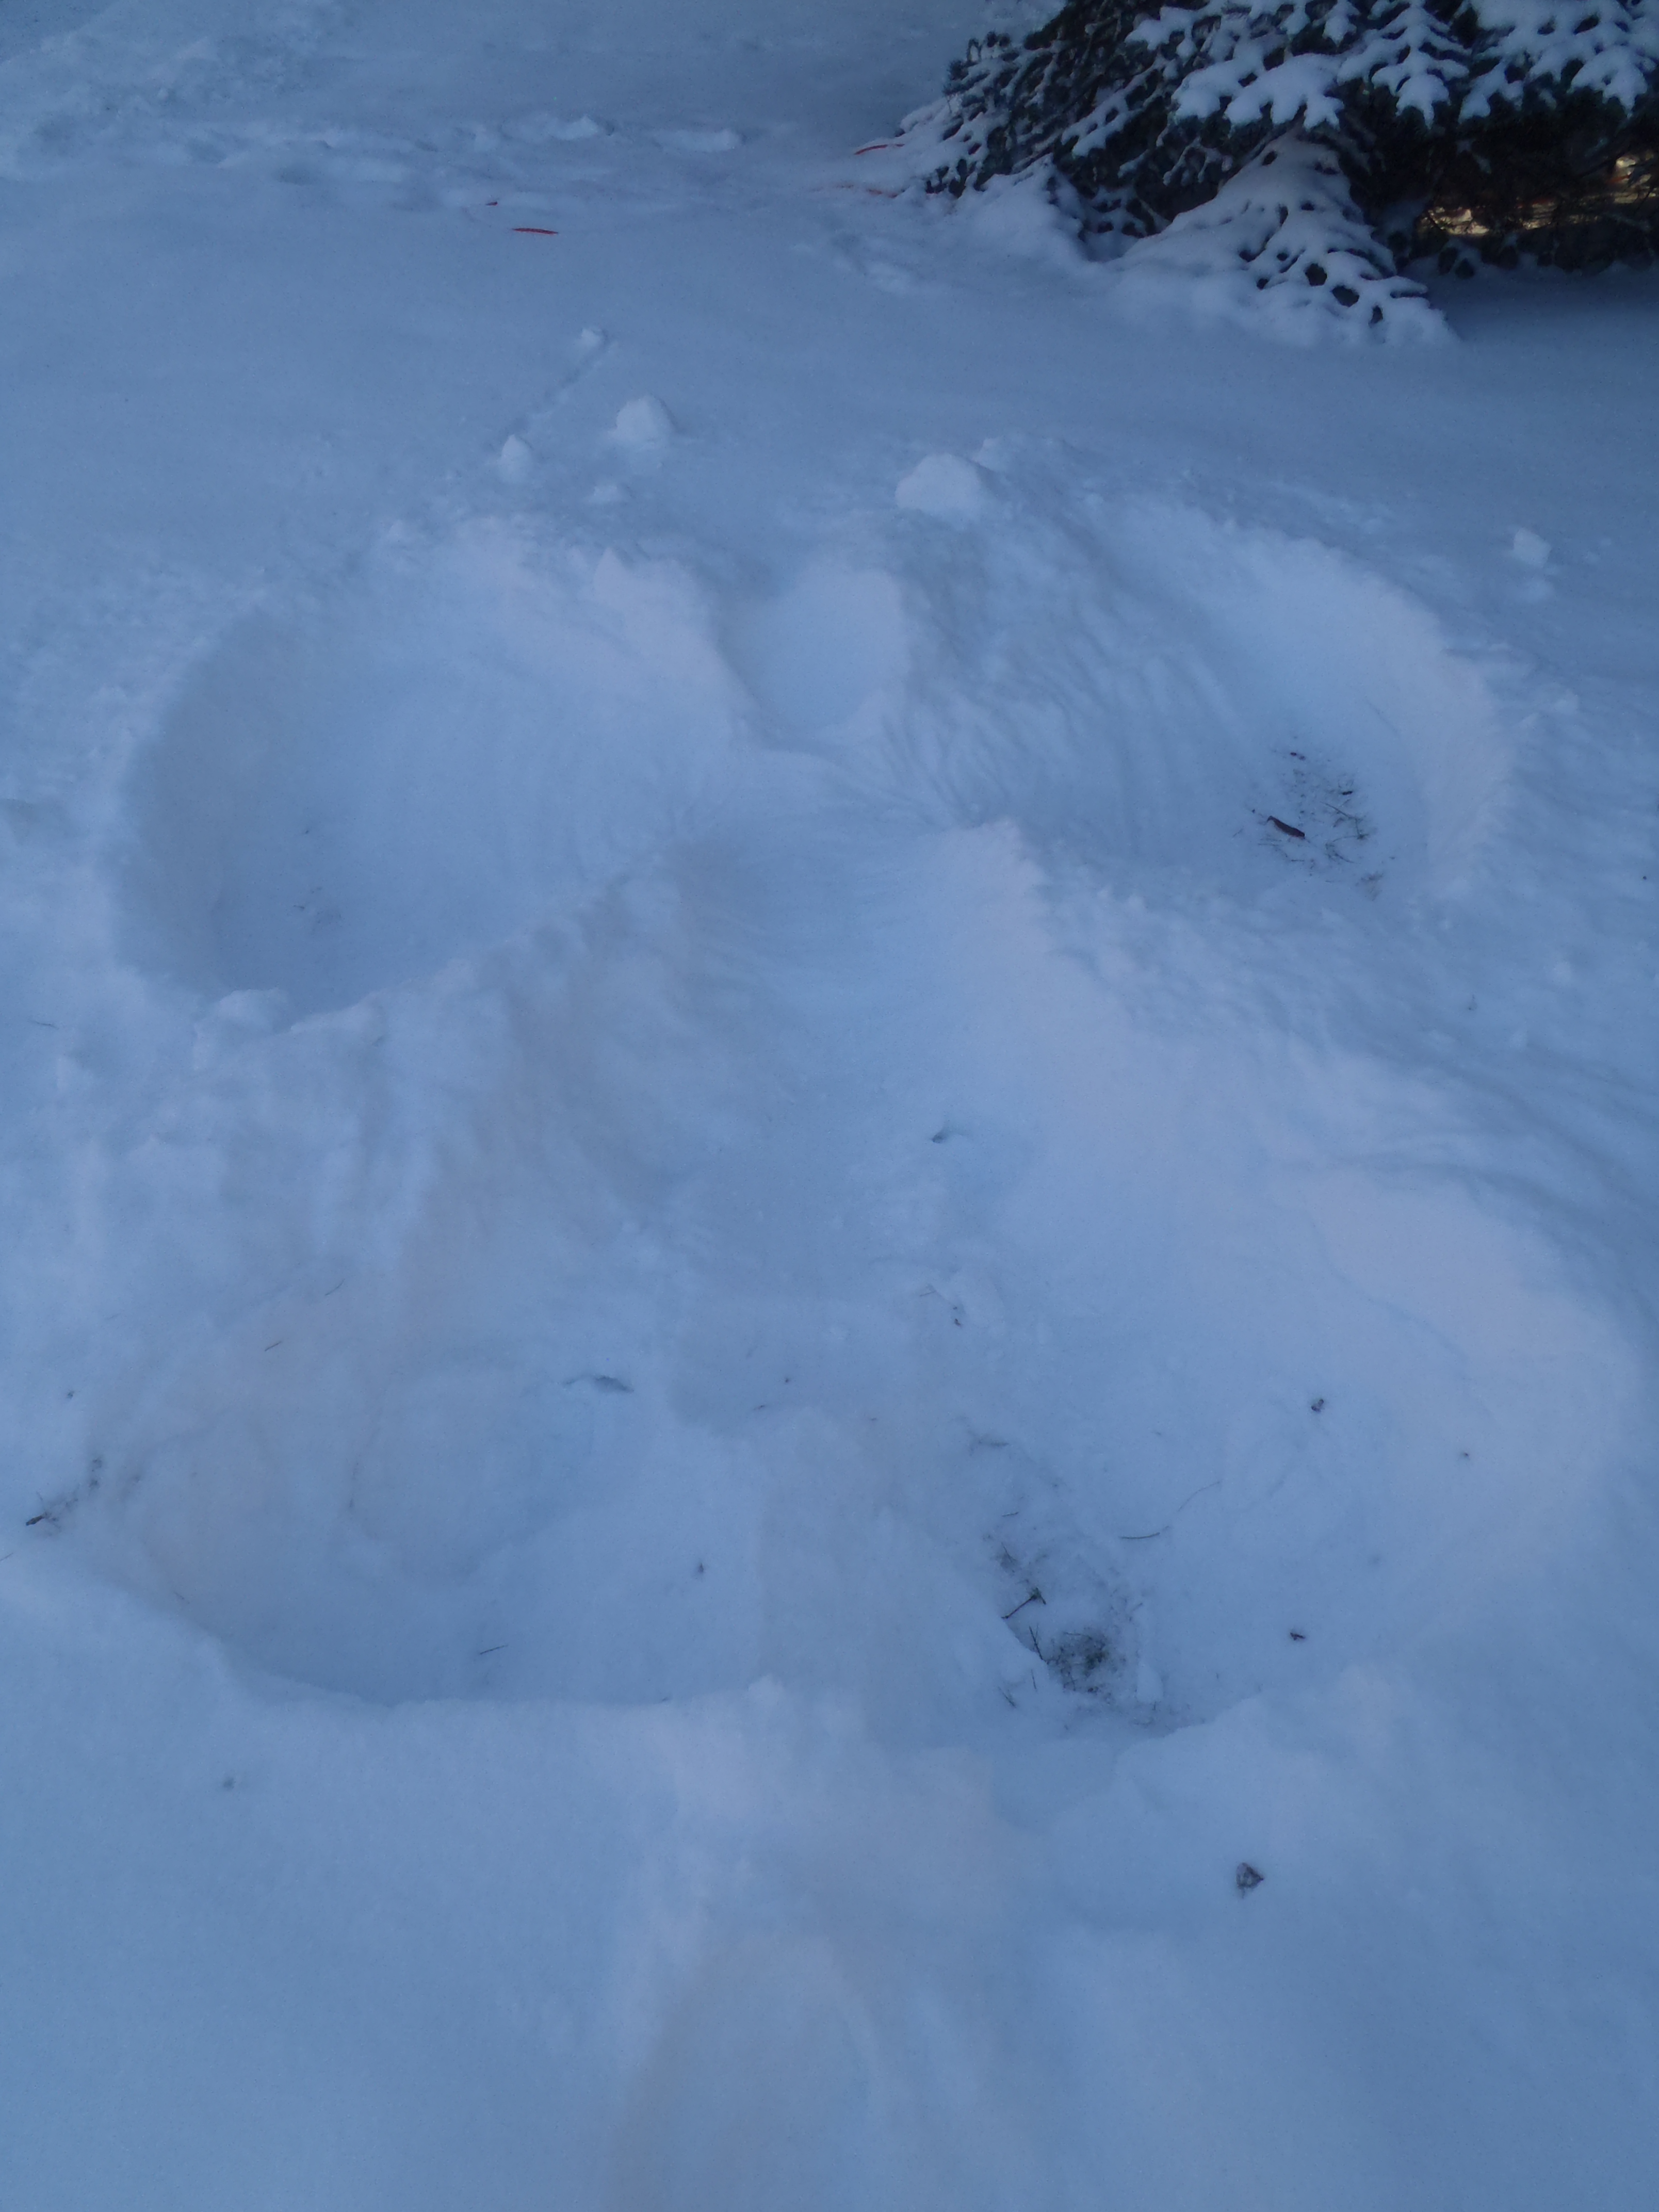 Snow angels: a solstice tradition